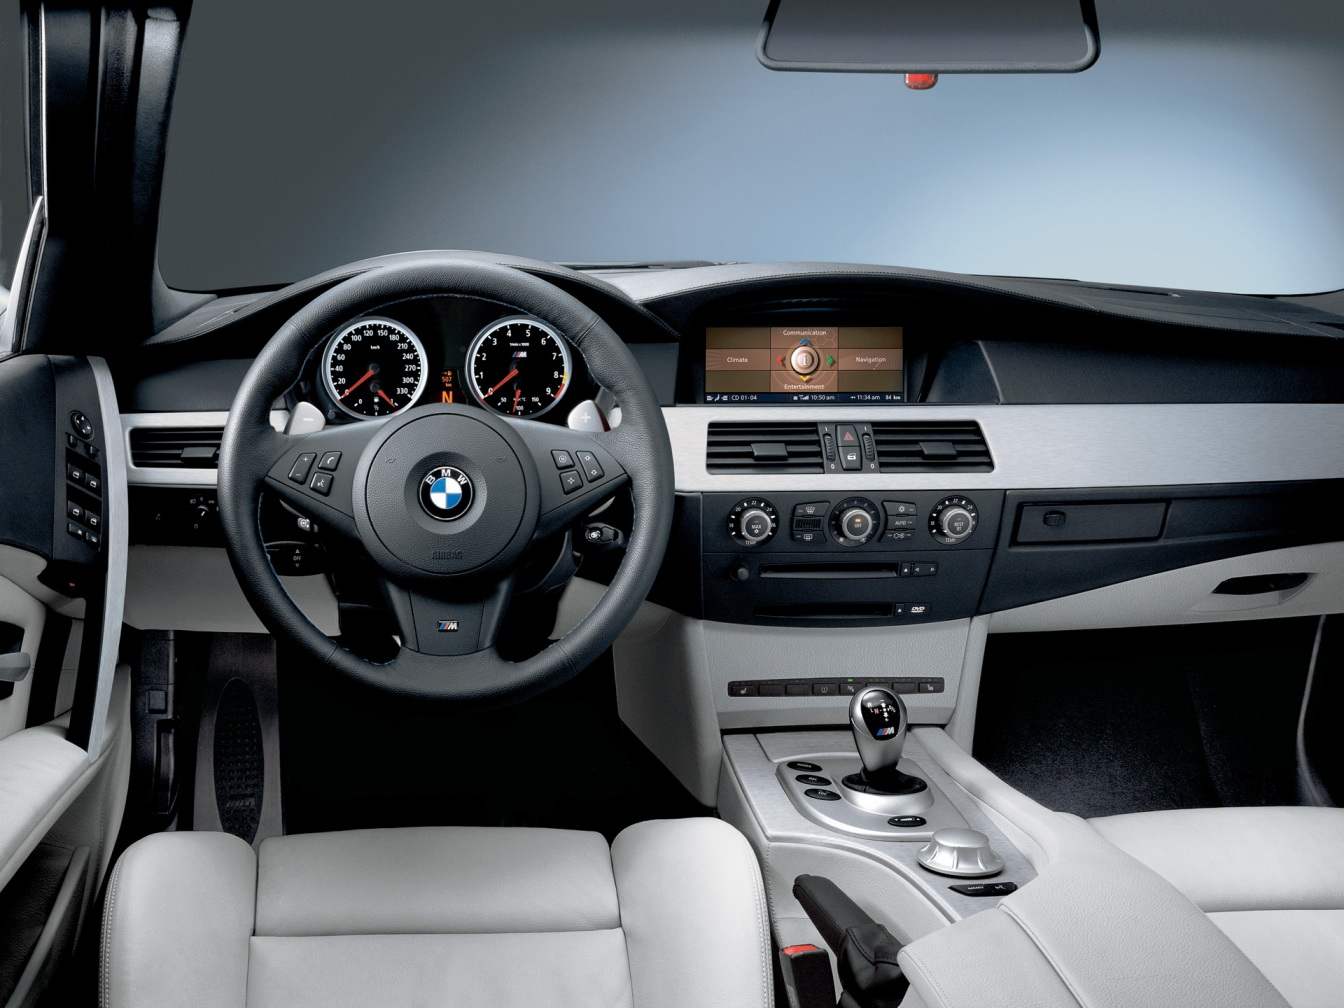 The front part of the interior of the BMW M5